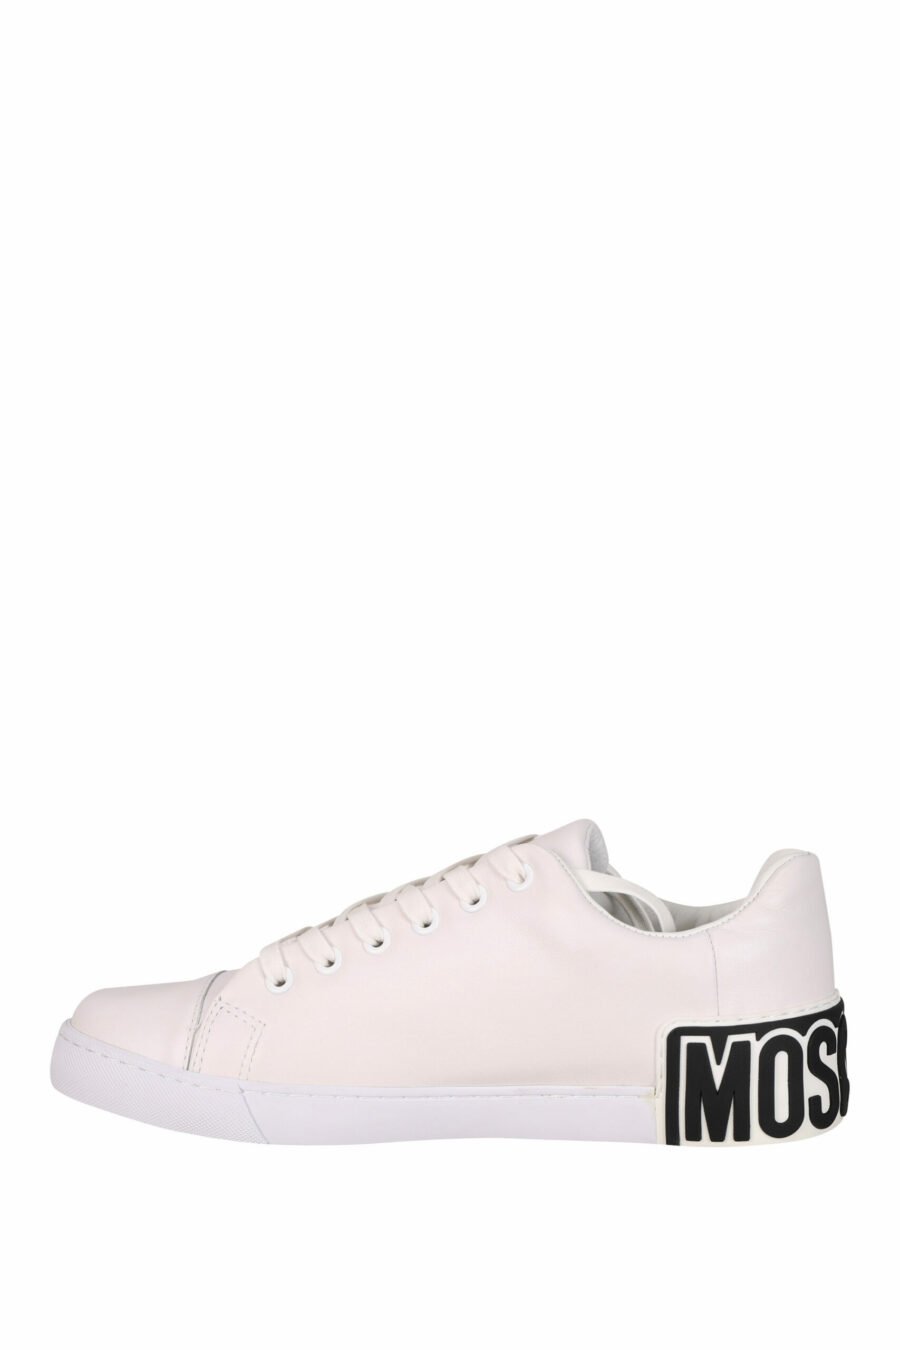 White trainers "vulc25" with black sole and rubber logo on the back - 8054388593519 2 scaled